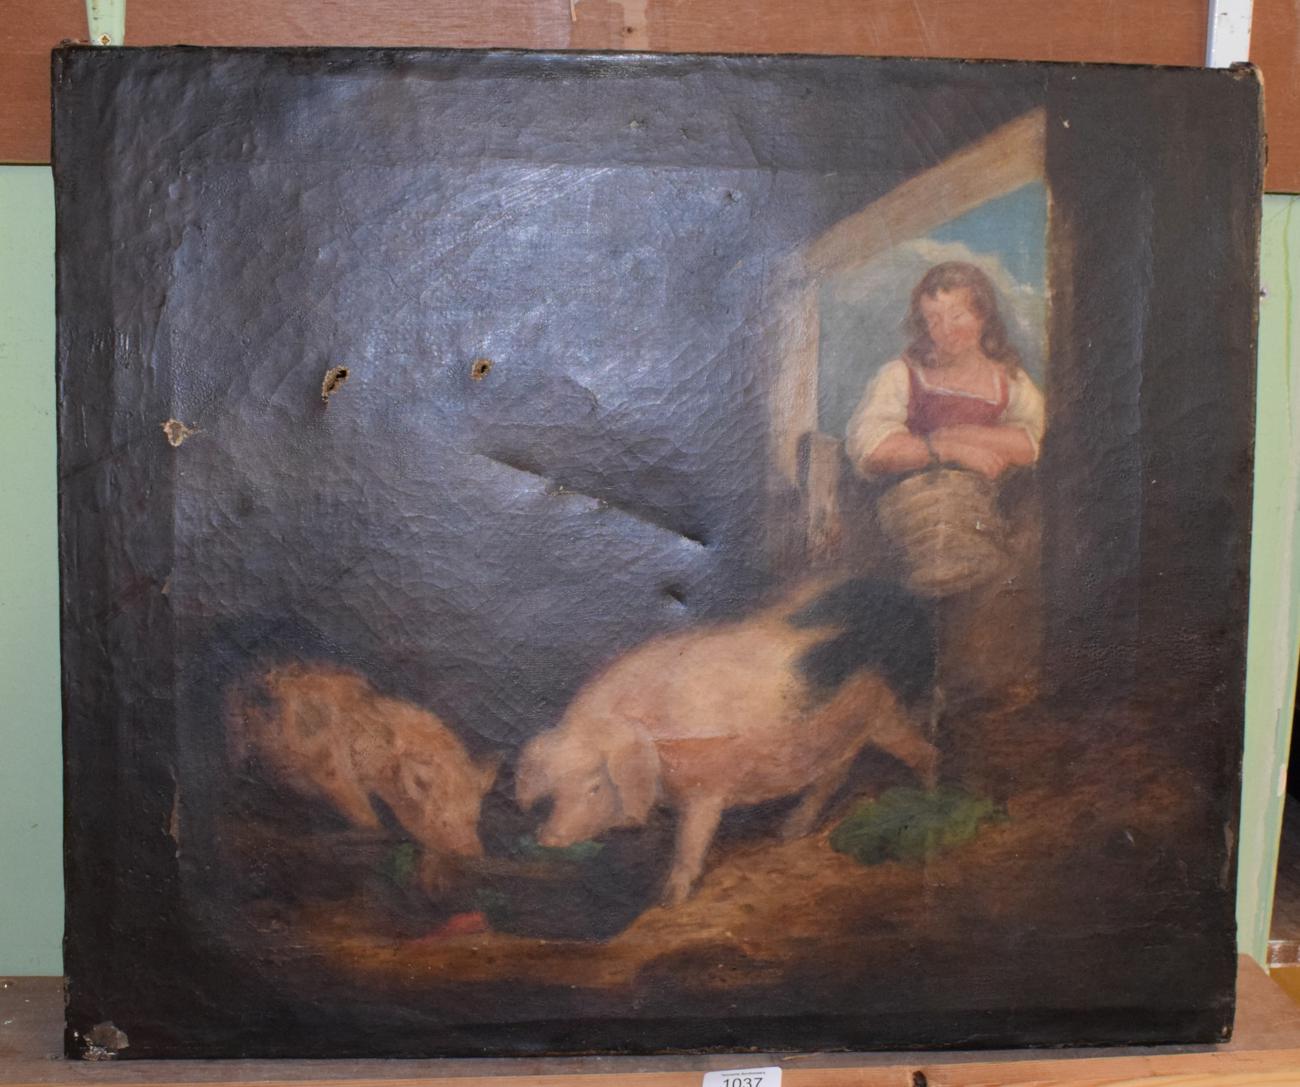 Lot 1037 - Attributed to George Morland, Girl feeding prize sows, oil on canvas, 51cm by 60.5cm